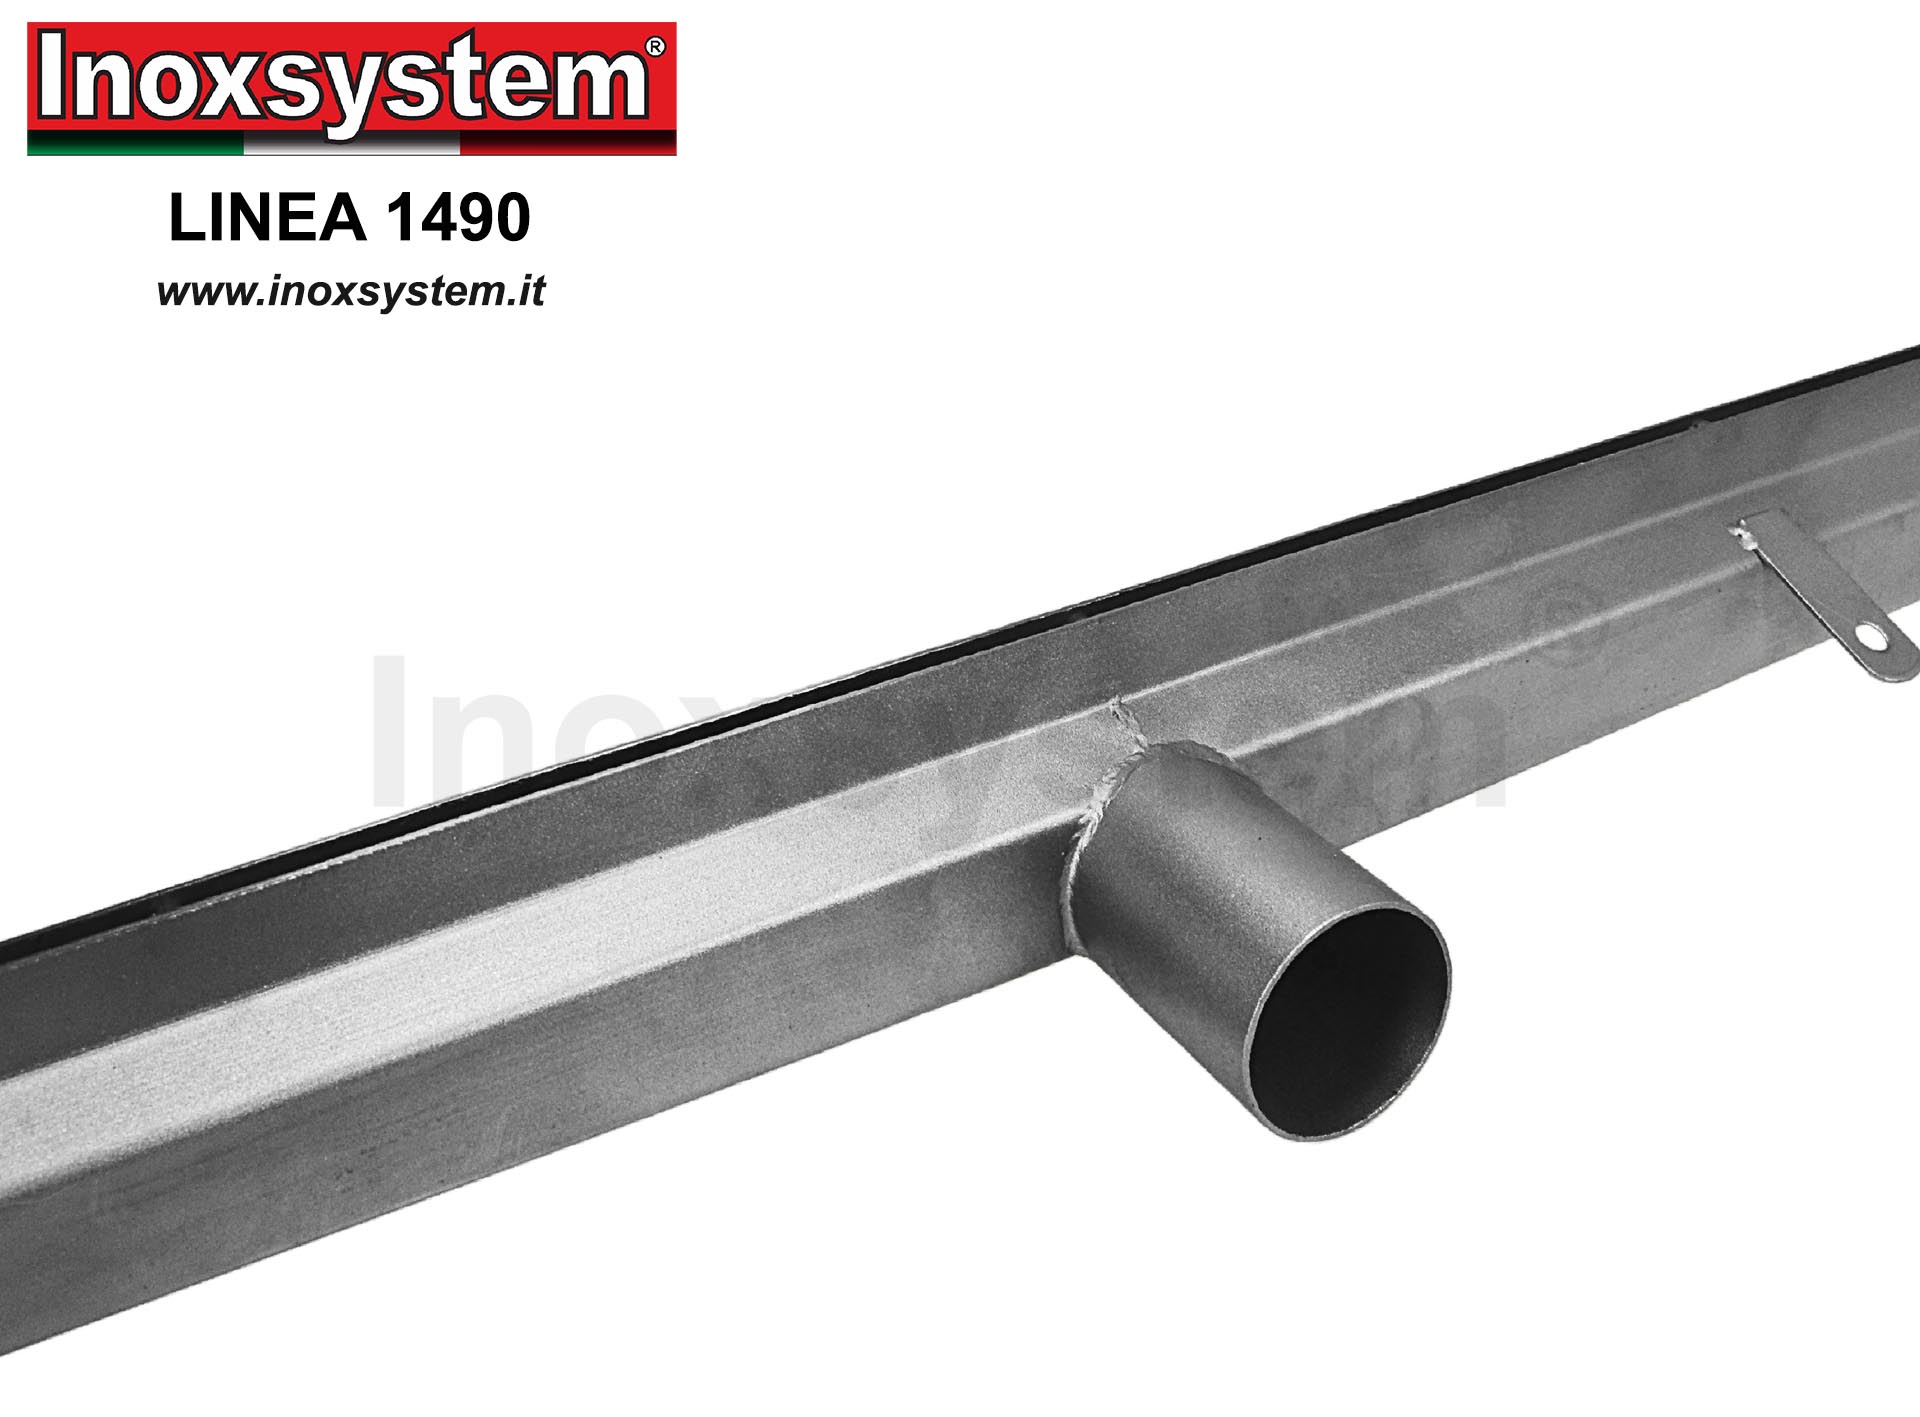 inoxsystem stainless steel drainage channel without gully